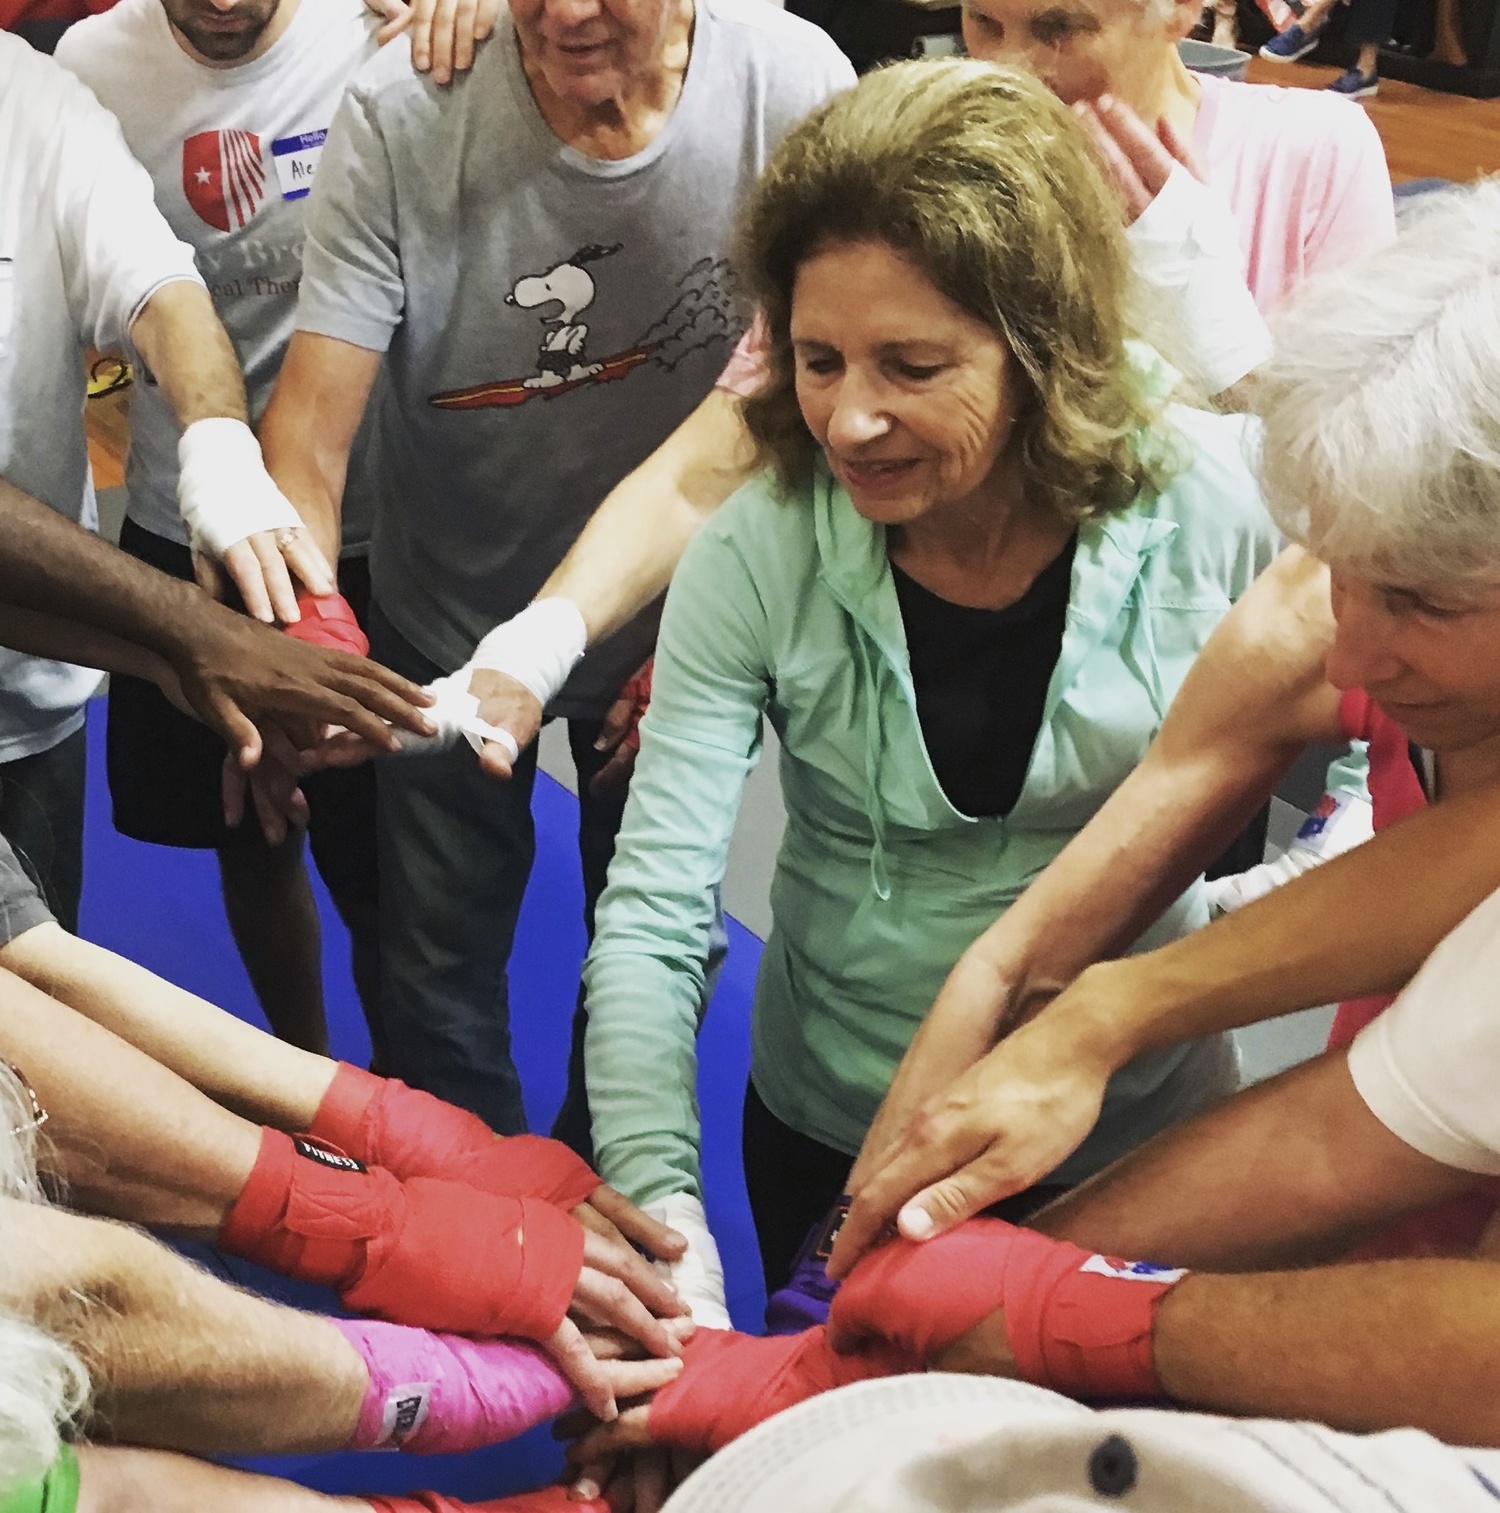 Bonnie Katz, center, puts her hands in with her fellow Rock Steady boxers at Epic Martial Arts in Sag Harbor. COURTESY MICHELLE DEL GIORNO